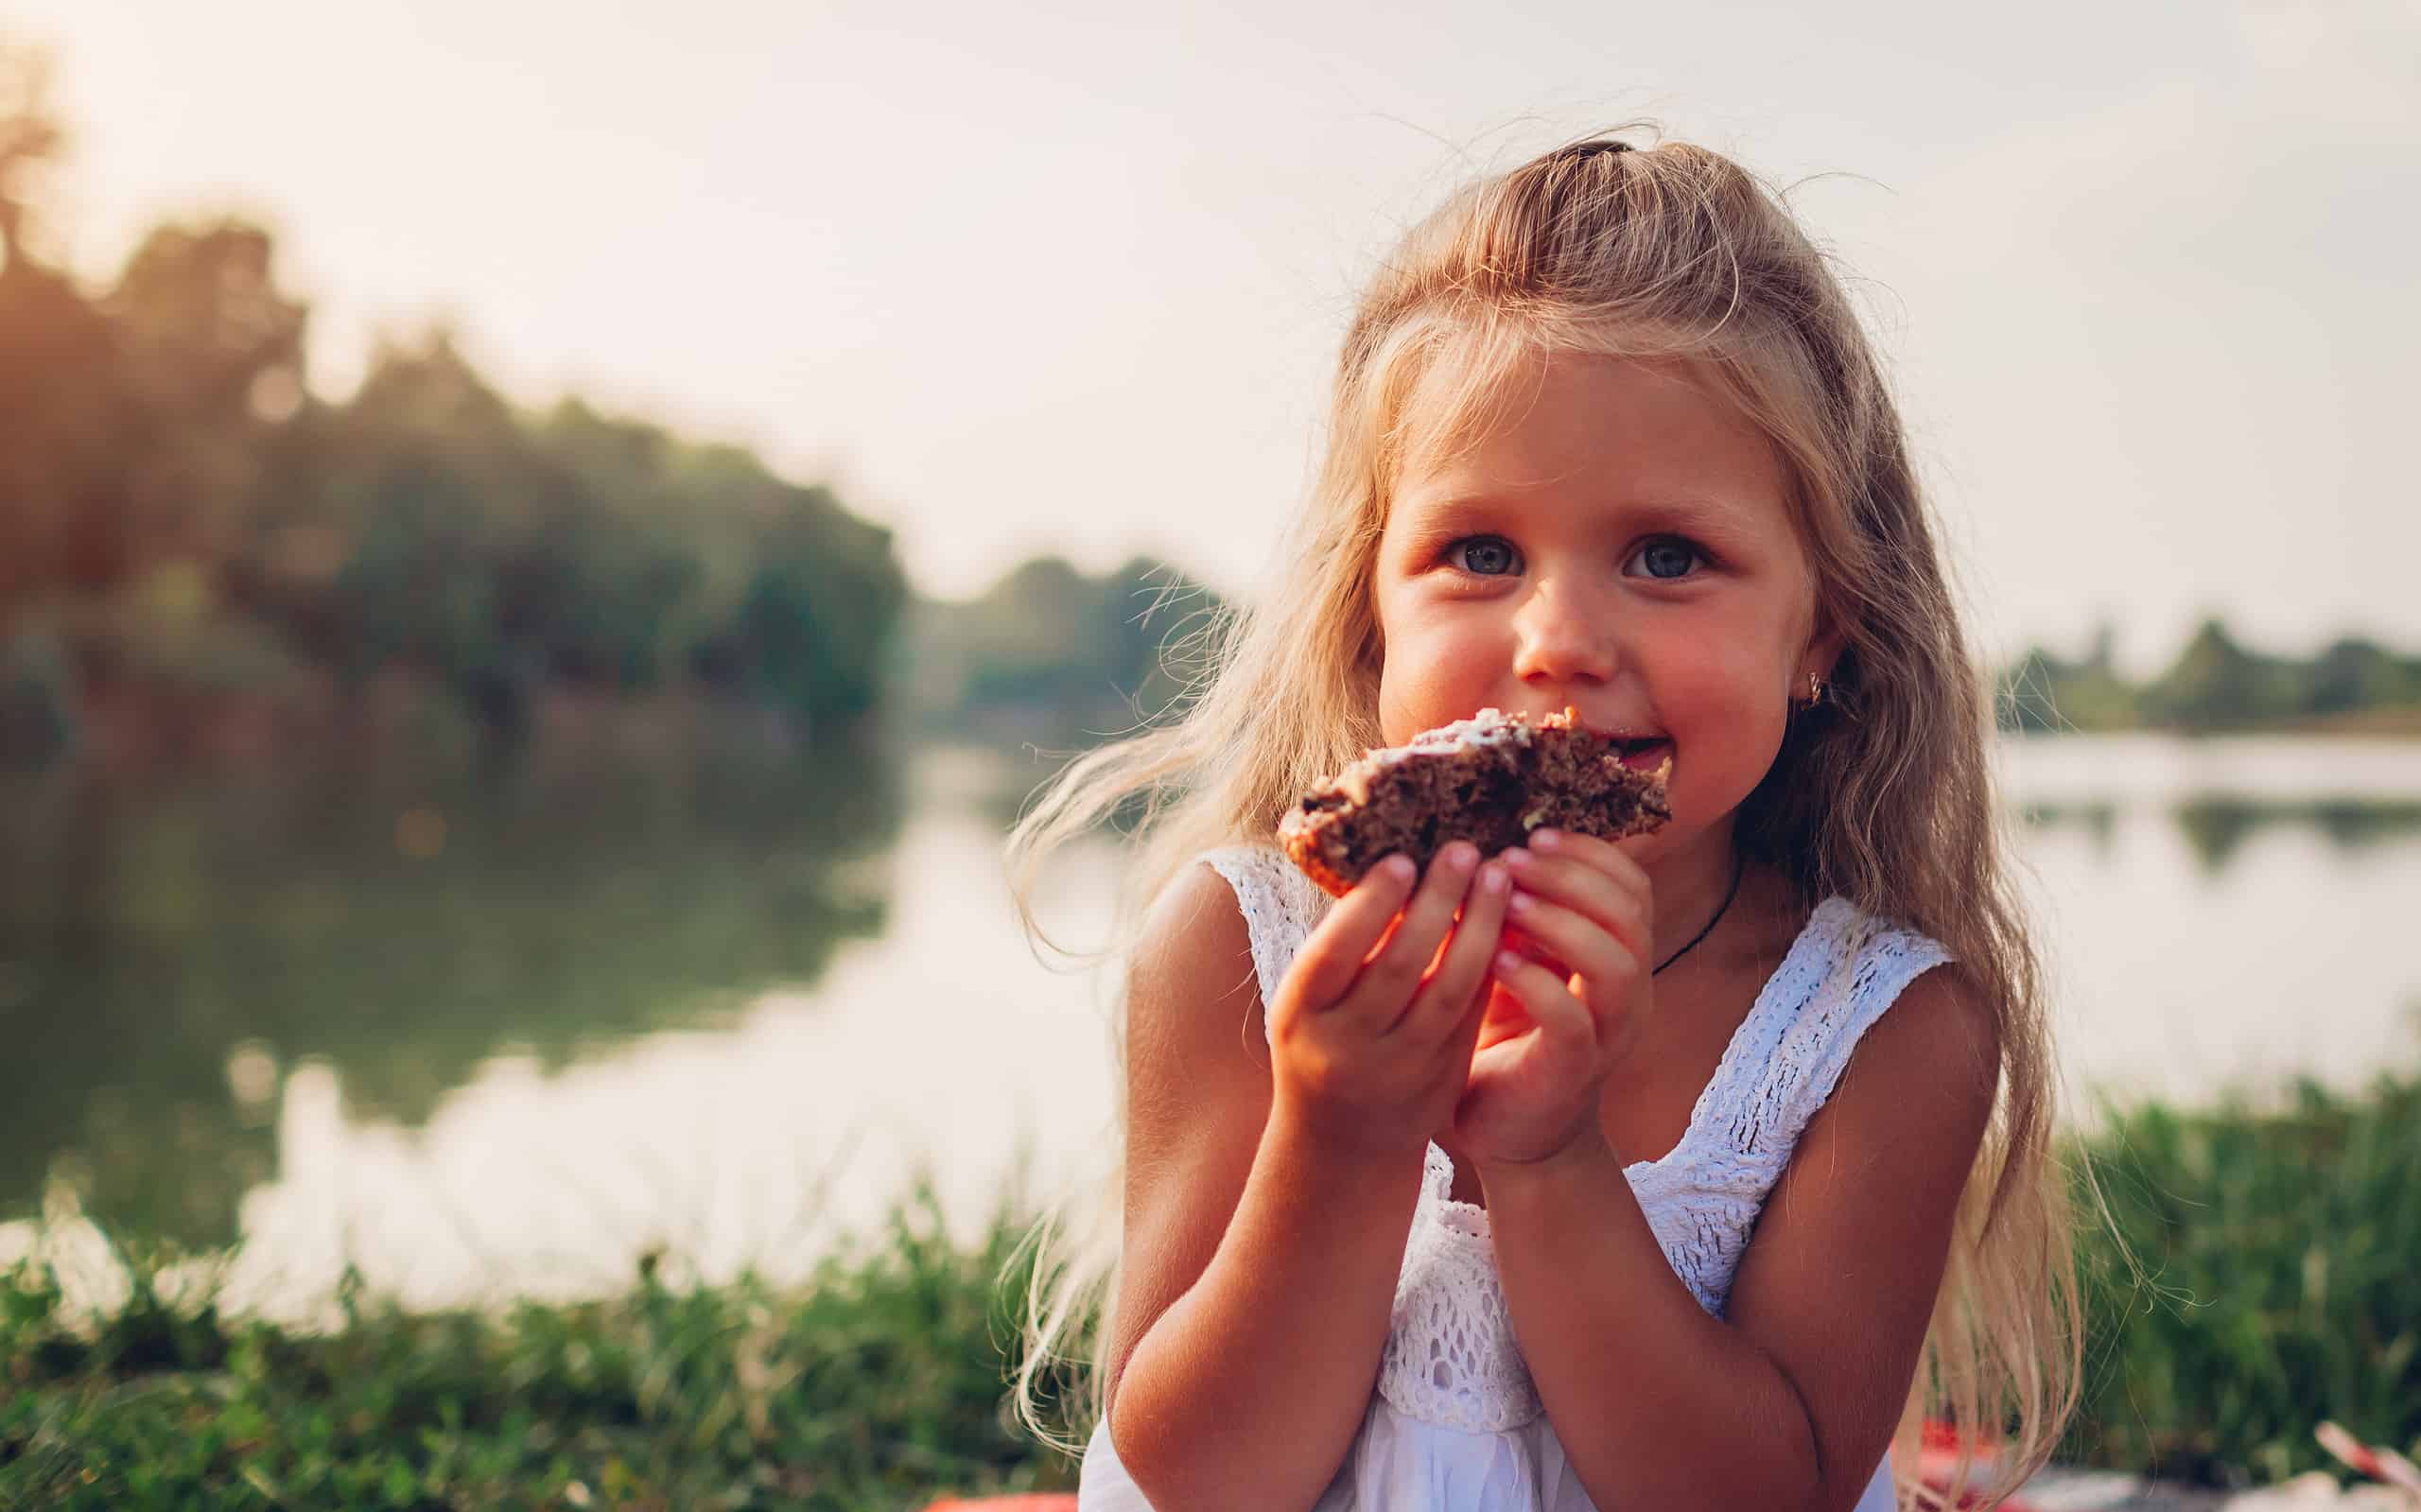 Little girl eating cake on family picnic by summer river. Child holding piece of pie